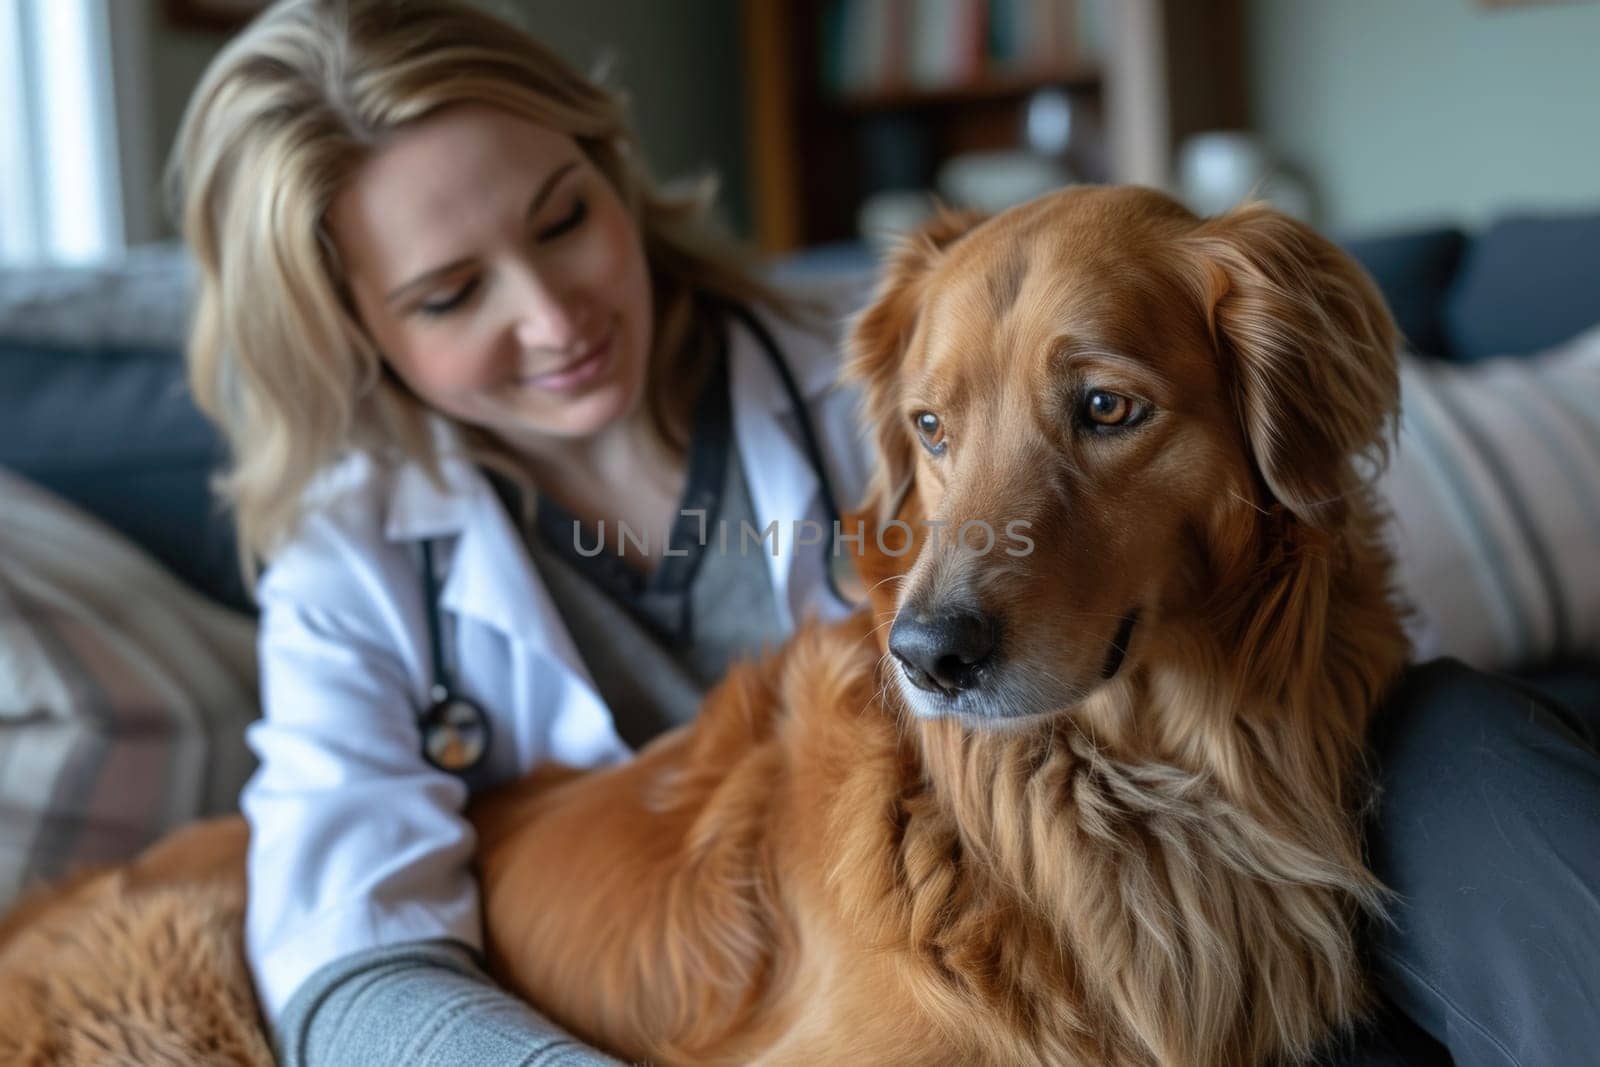 Home Visit: Veterinarian Meets Dog and Owner